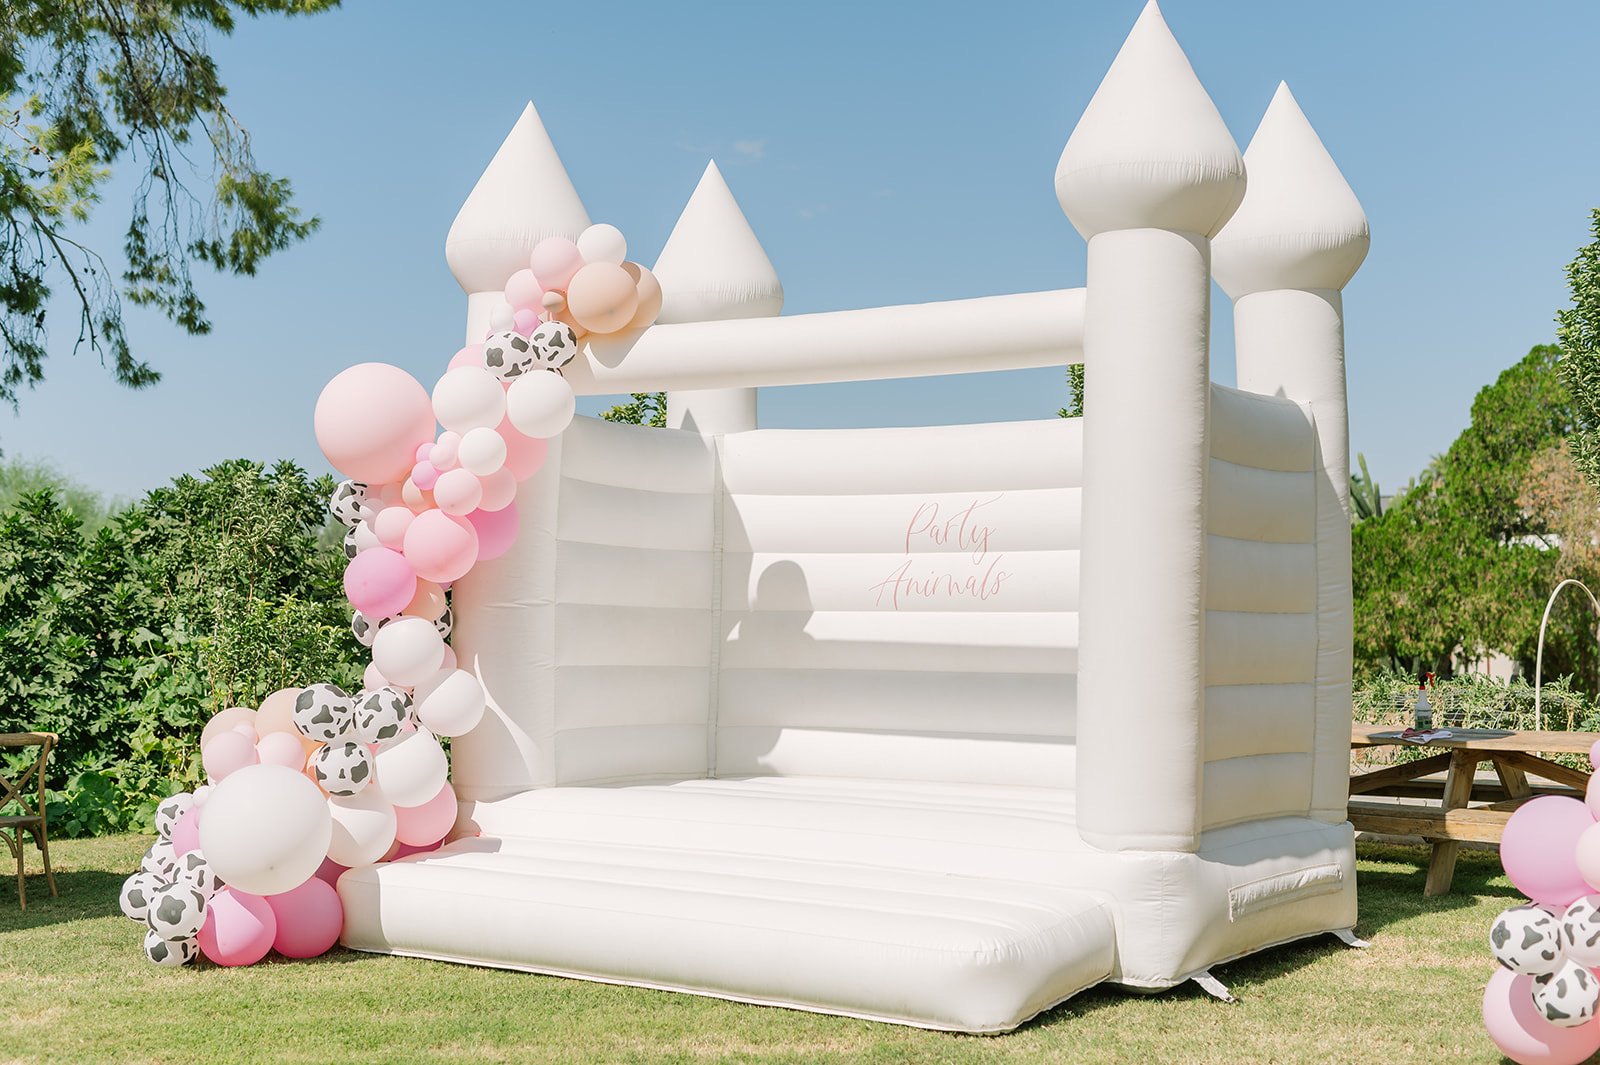 White Wedding Bounce House Commercial Grade PVC Inflatable wedding Bouncy Castle /Jumping Bed/Bouncer With Air Blower For party and events Activities